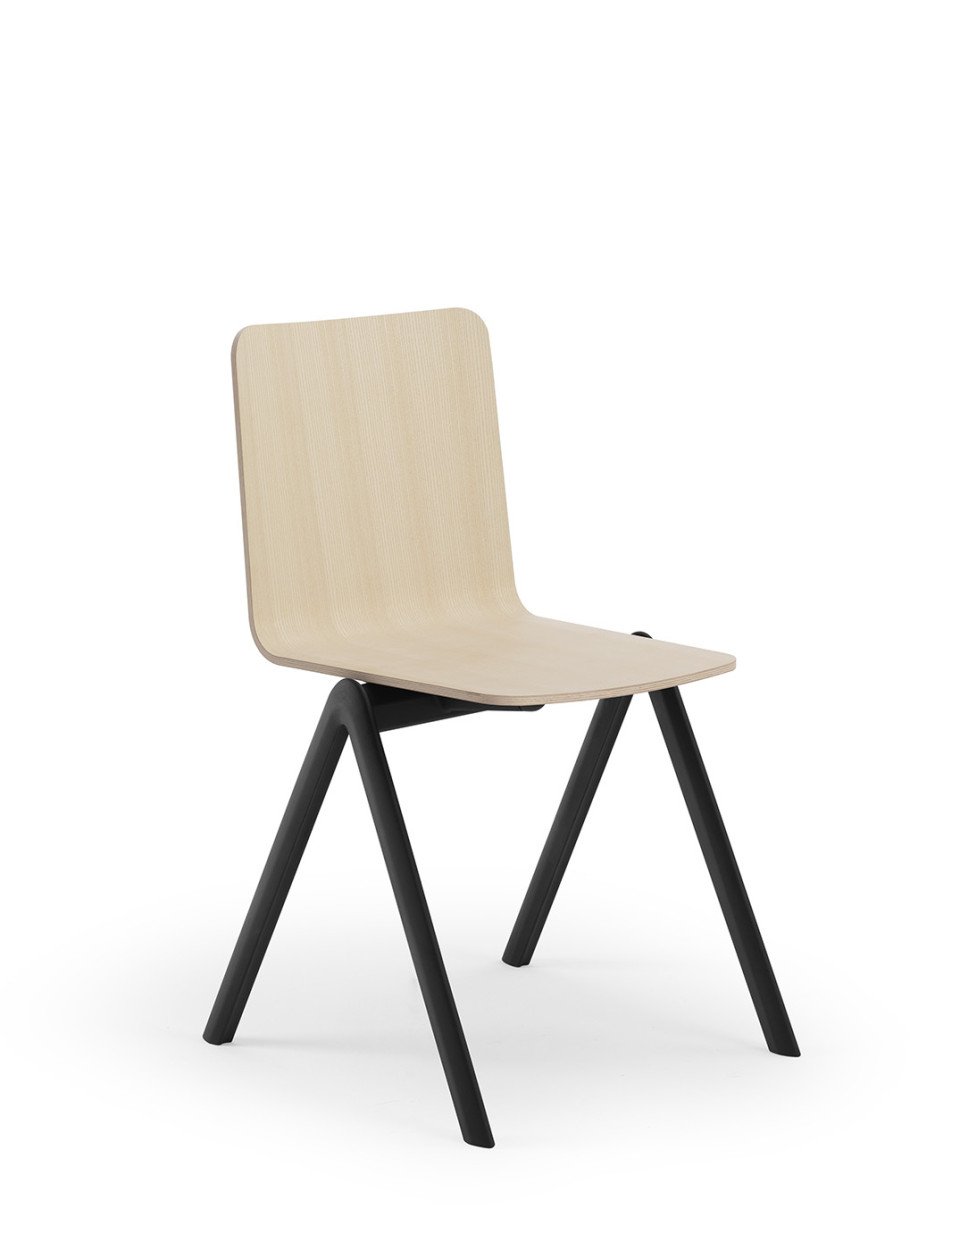 Stack Chair from Midj, designed by Martini & Dall'Agnol